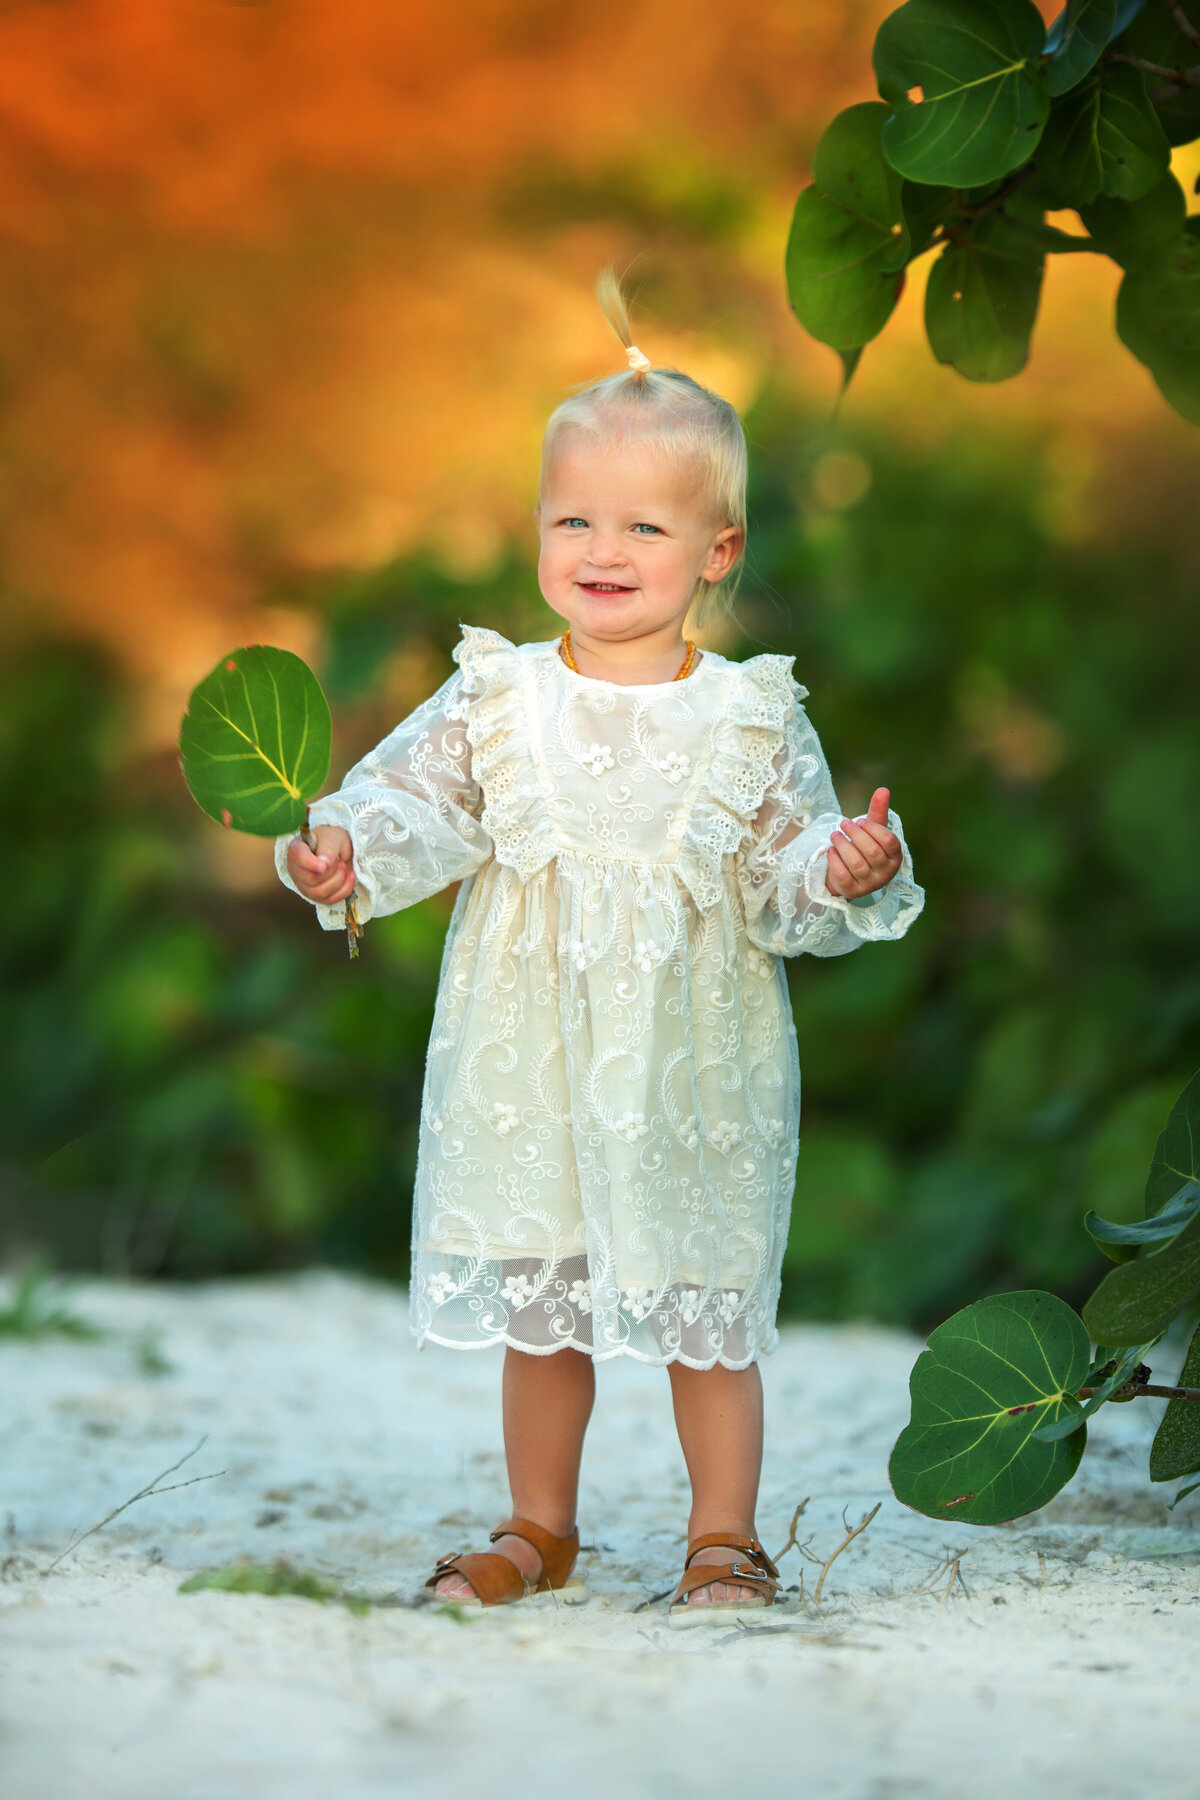 Stylish baby girl in vintage inspired lace dress  on white sand beach